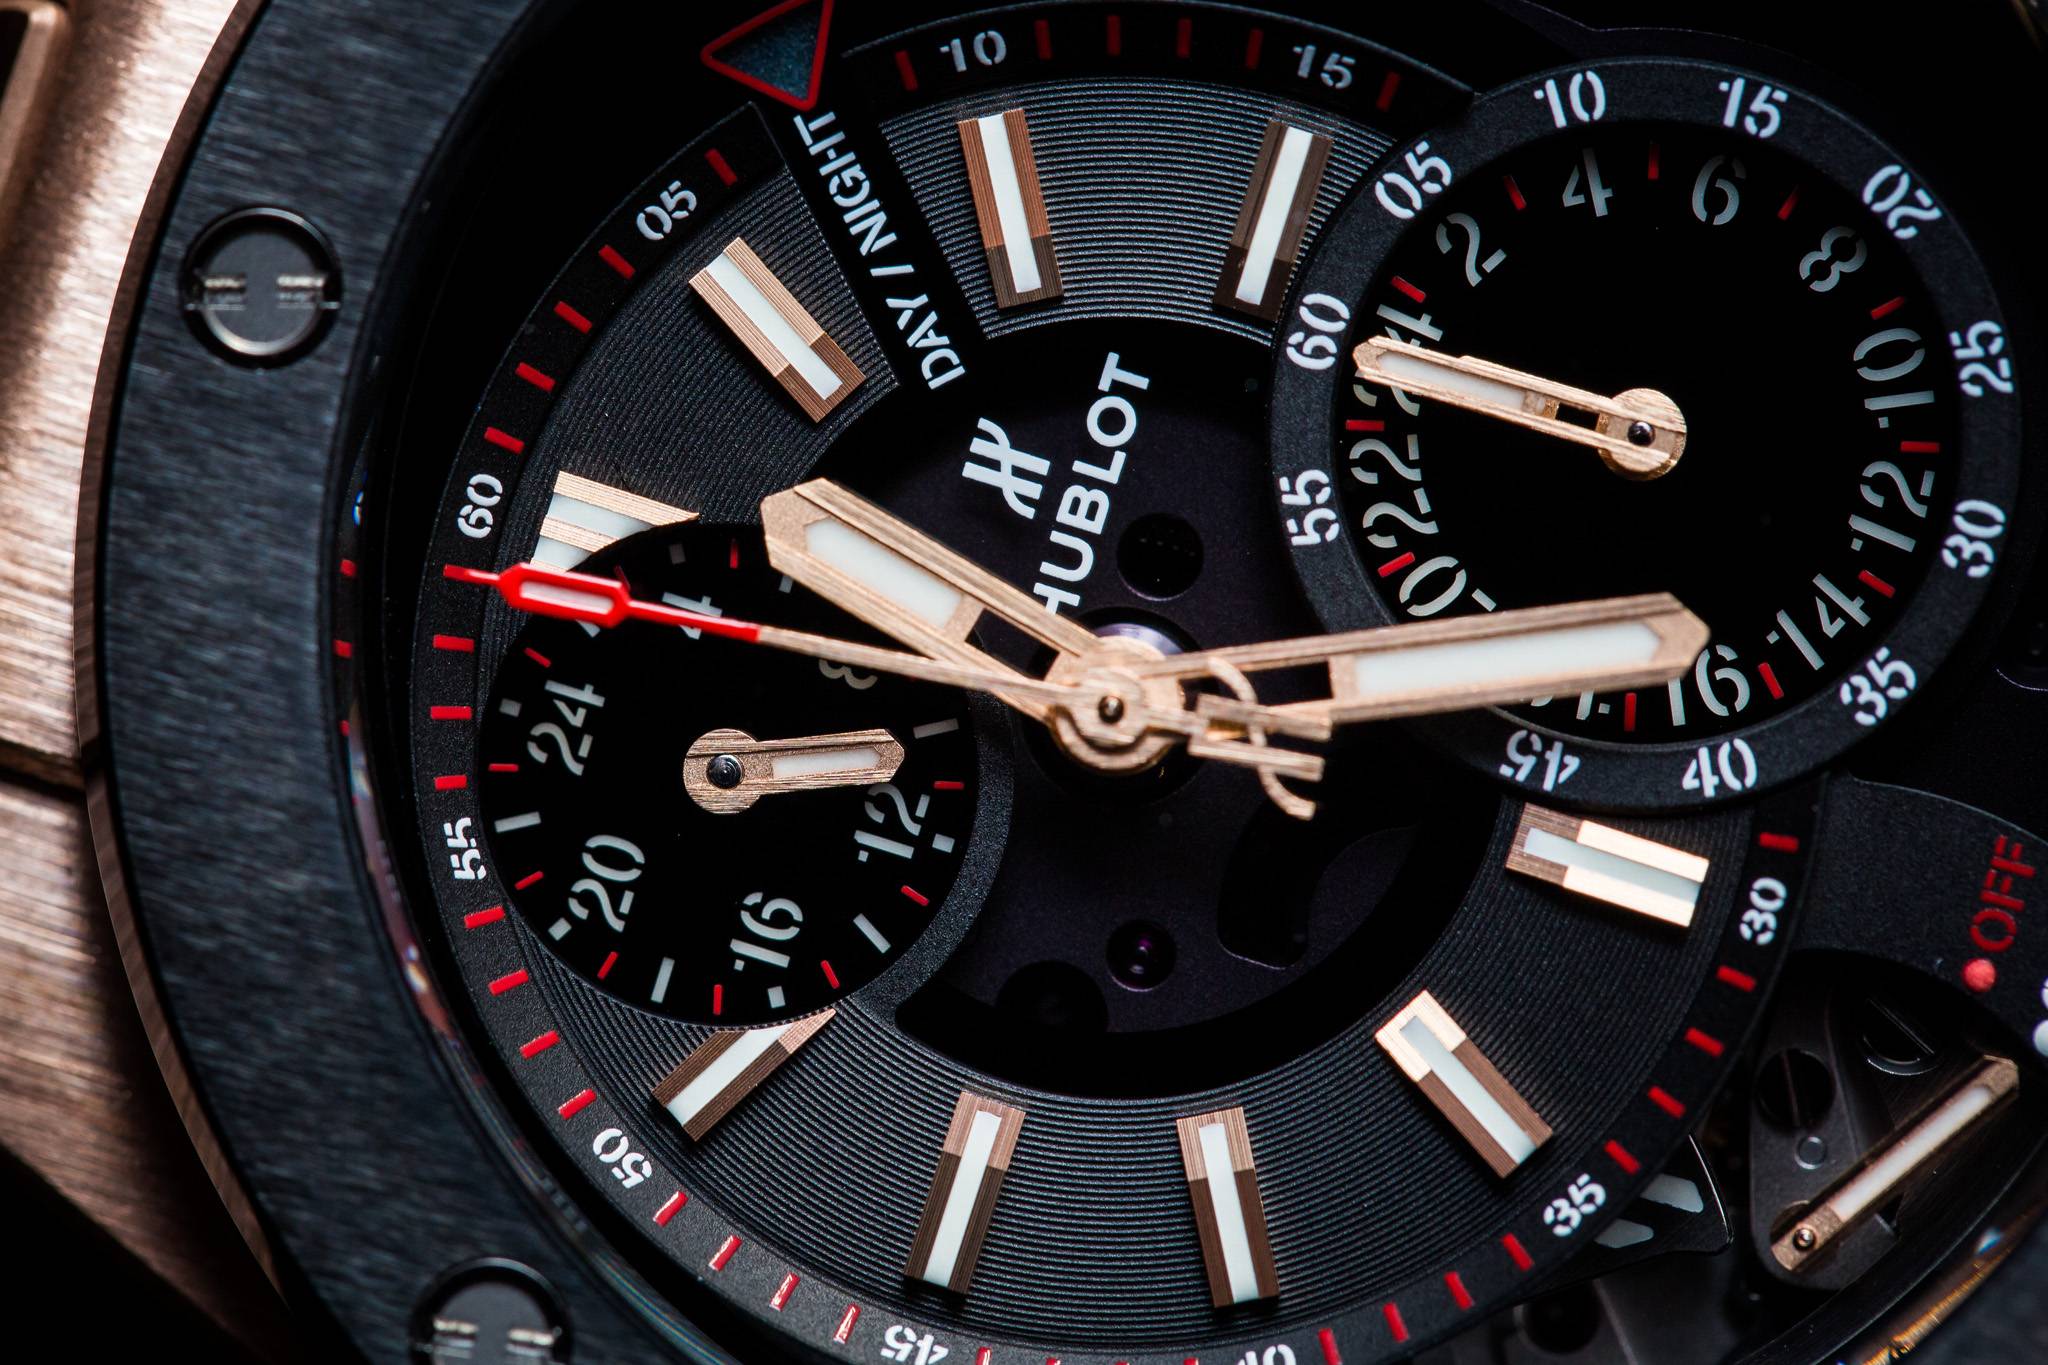 Hands On The Hublot Big Bang Alarm Repeater, A Sound Way To Wake Up In The Morning